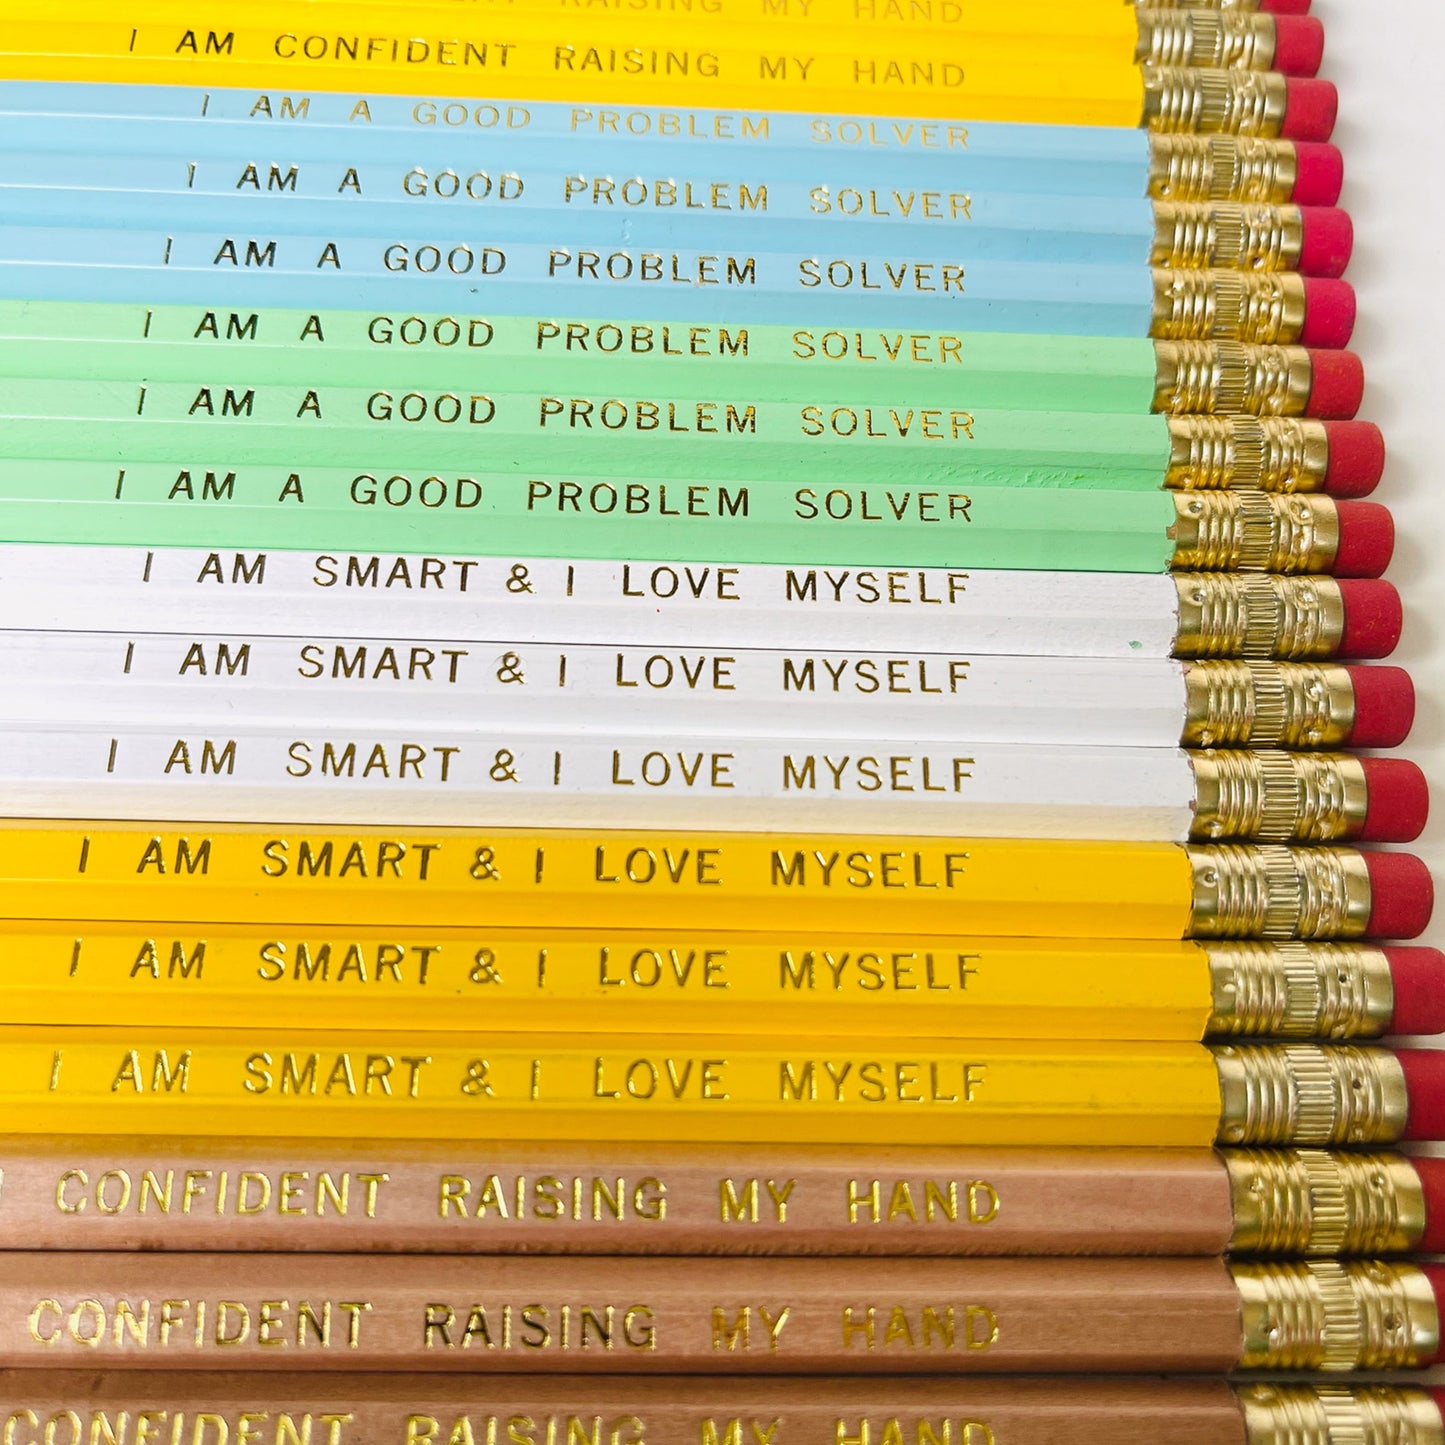  Giving little ones a head start on their journey to confidence and self-belief, this pack of 7 pencils is designed to inspire and uplift, providing young minds with positive messages that they can see and repeat every day.